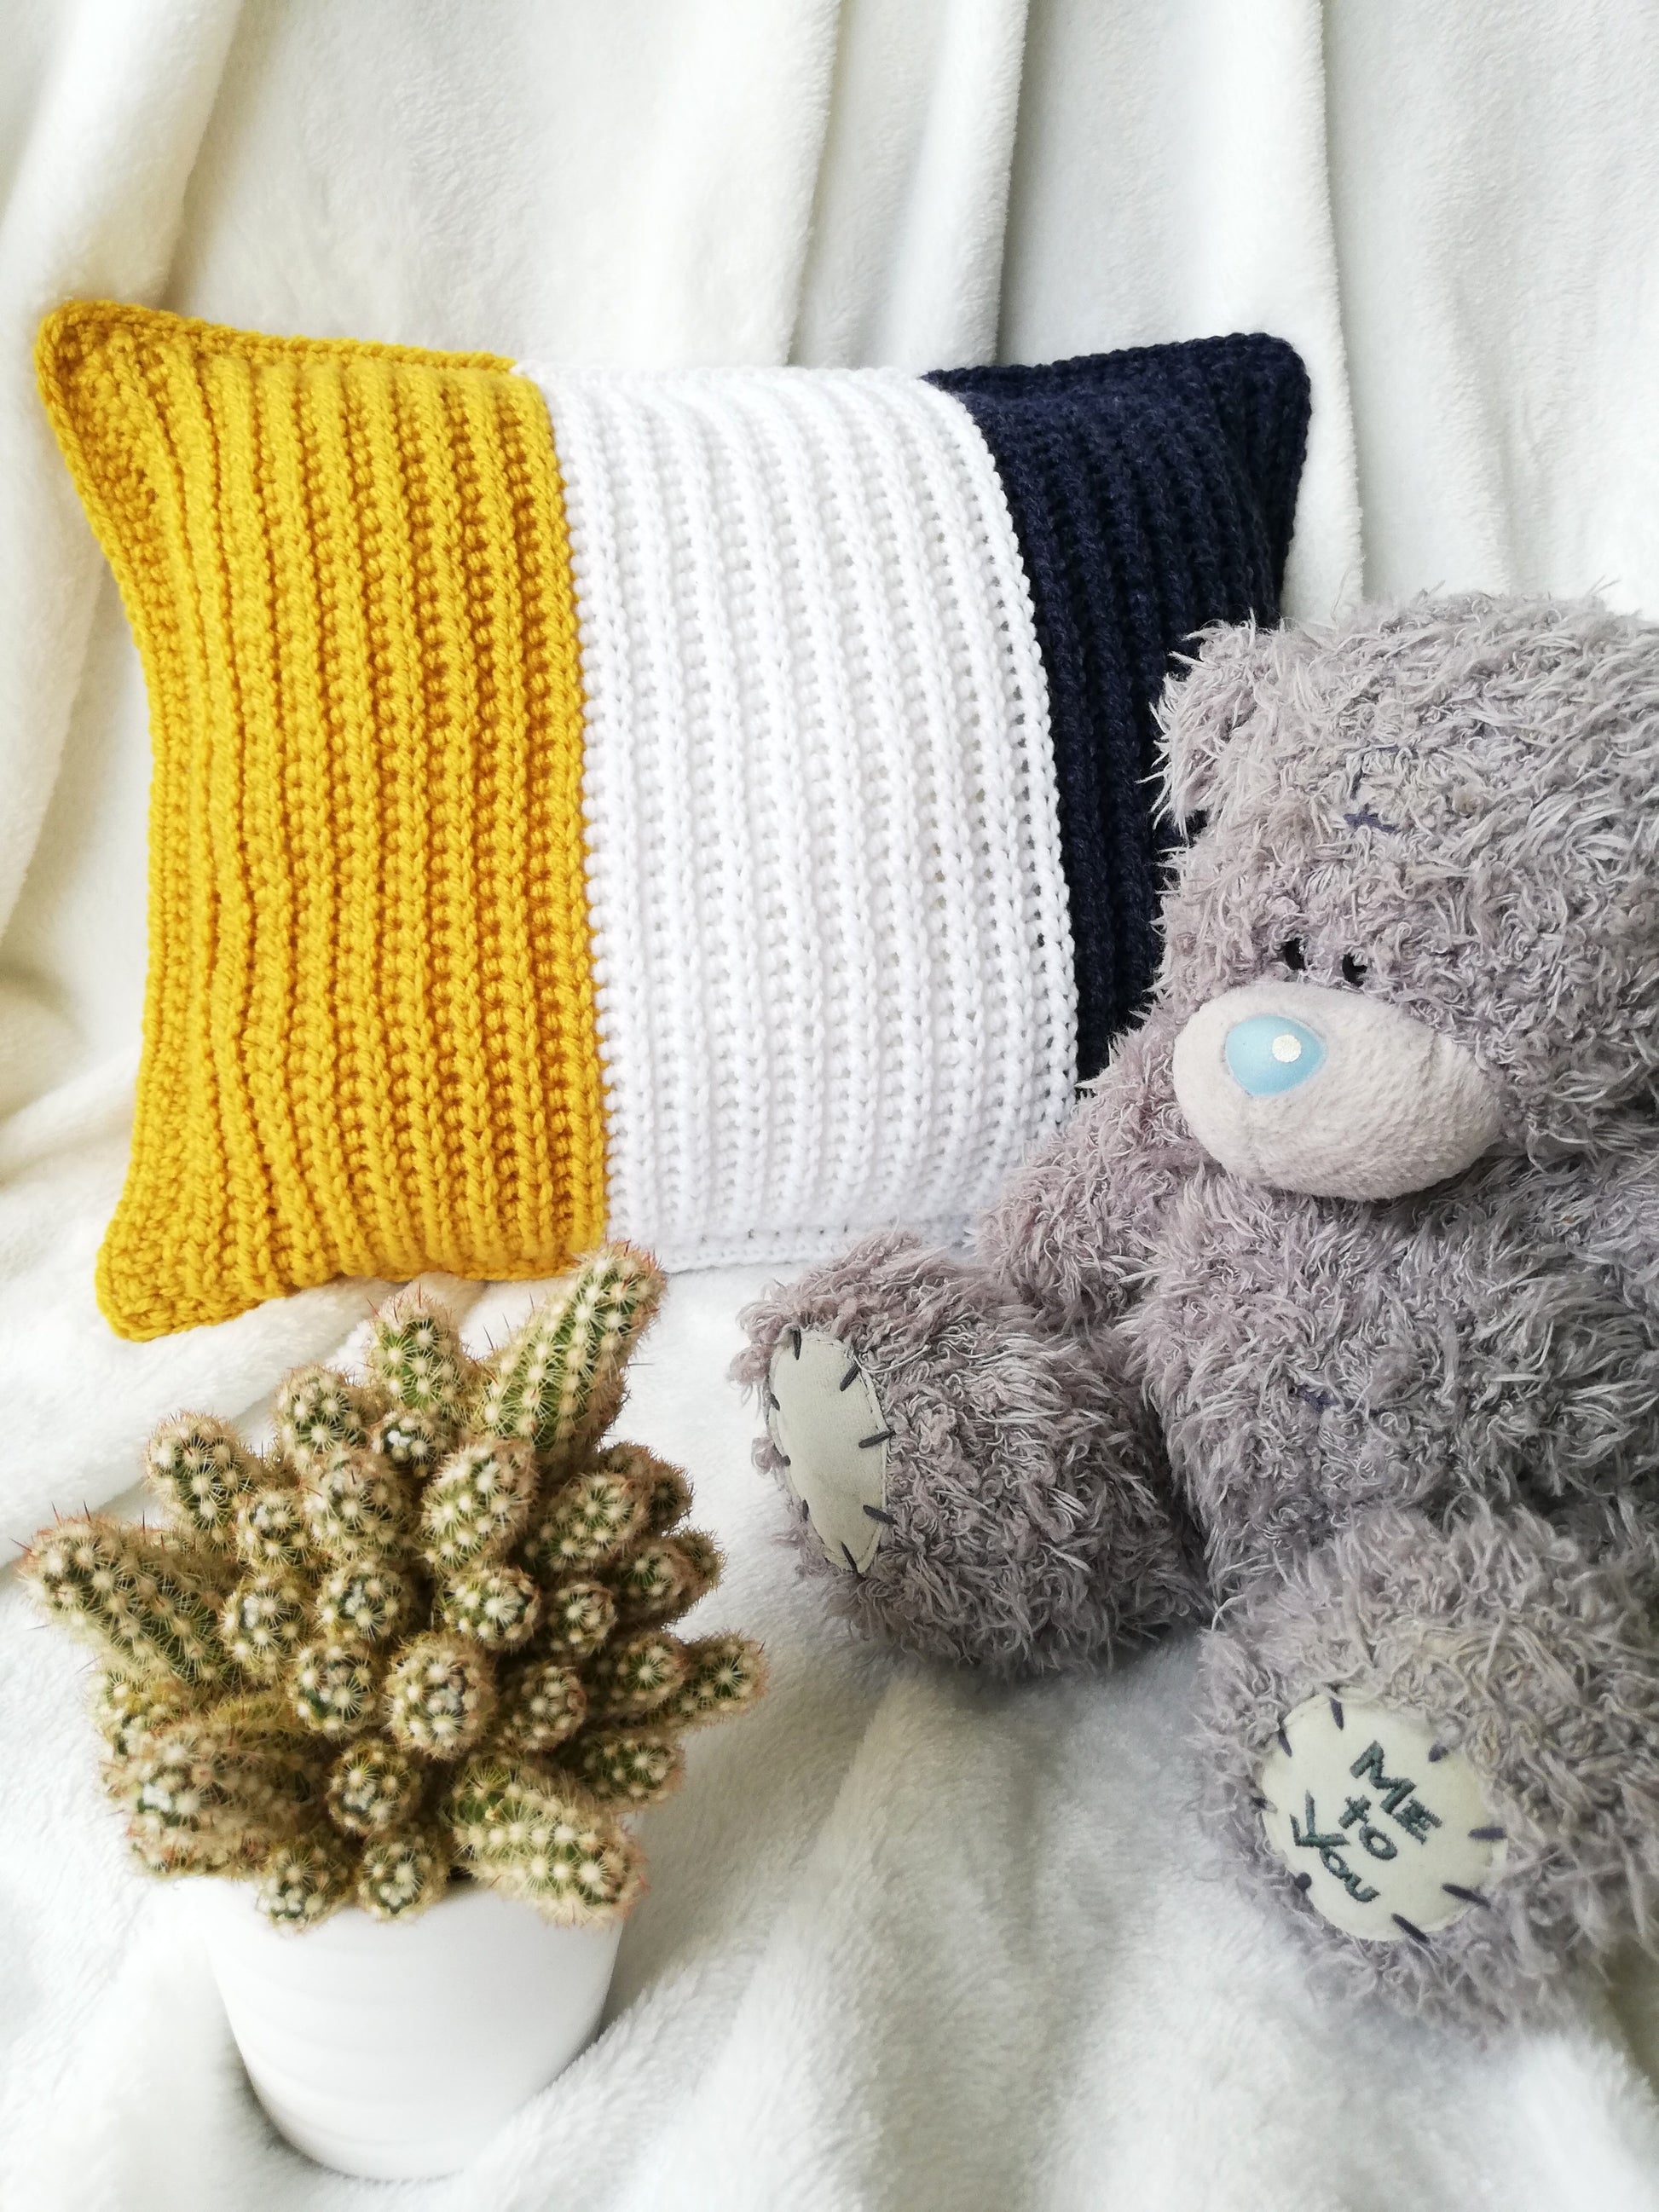 Crochet pattern: easy three color pillow